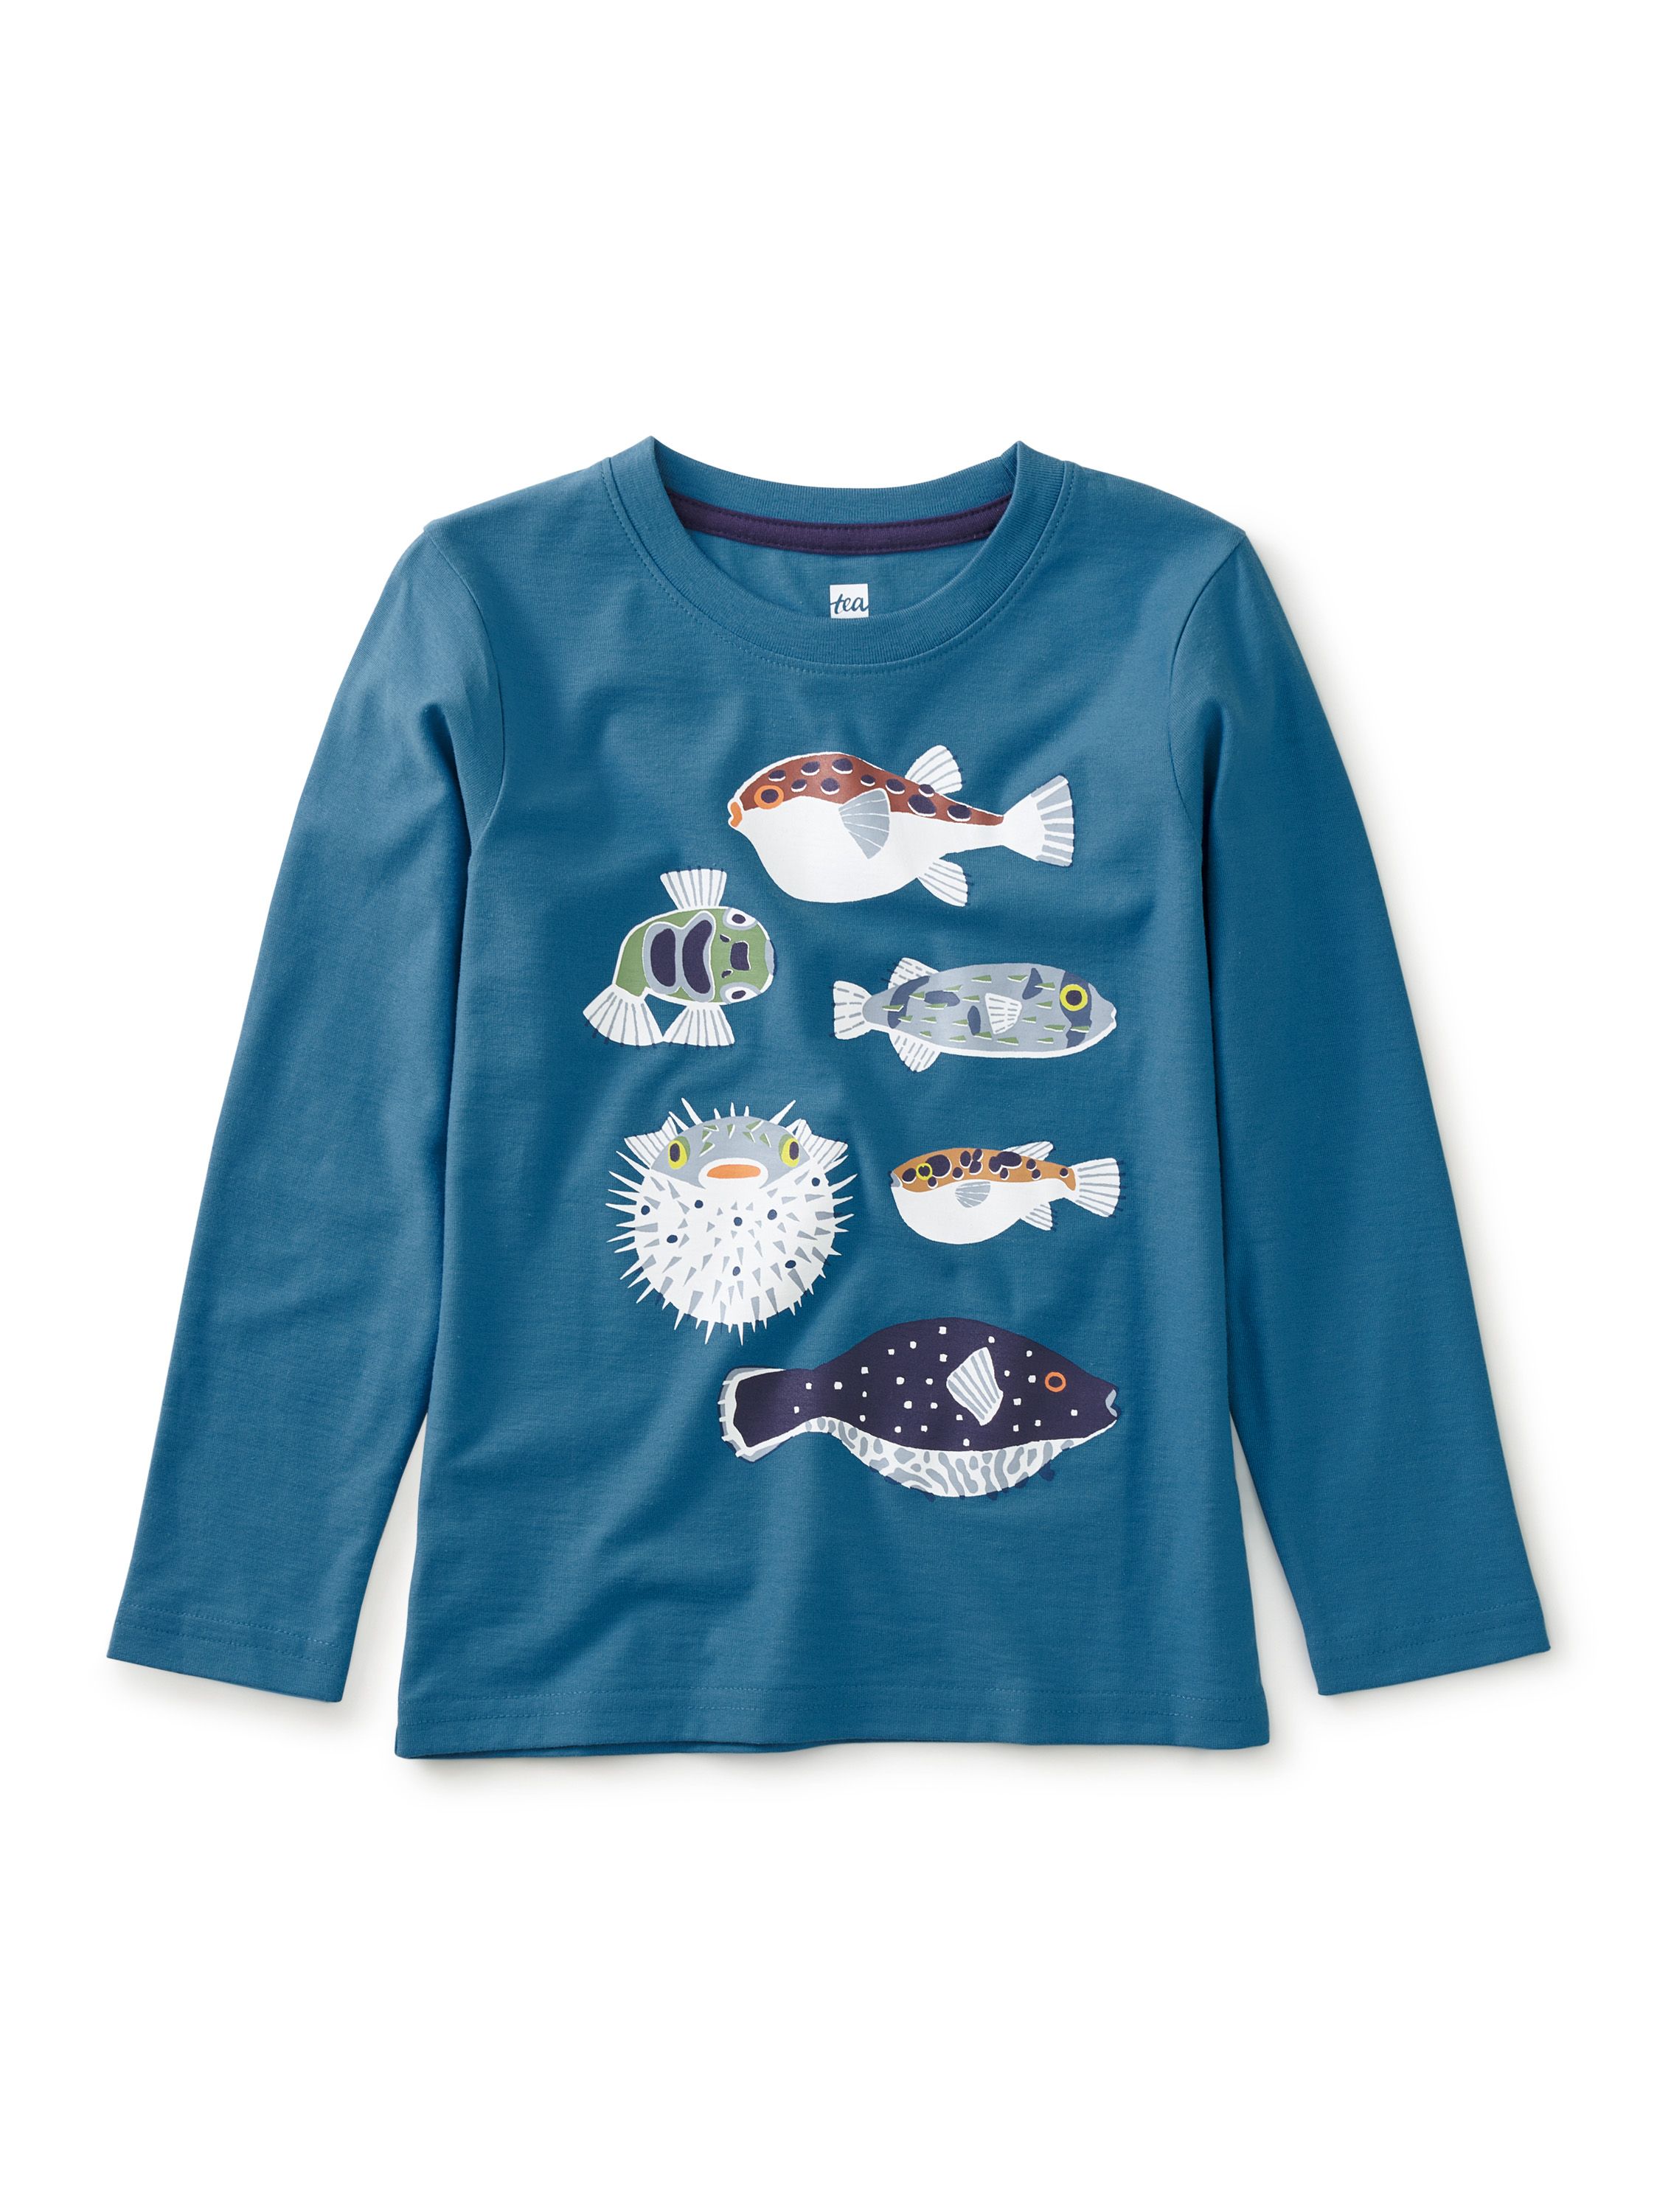 Pufferfish Parade Graphic Tee | Tea Collection